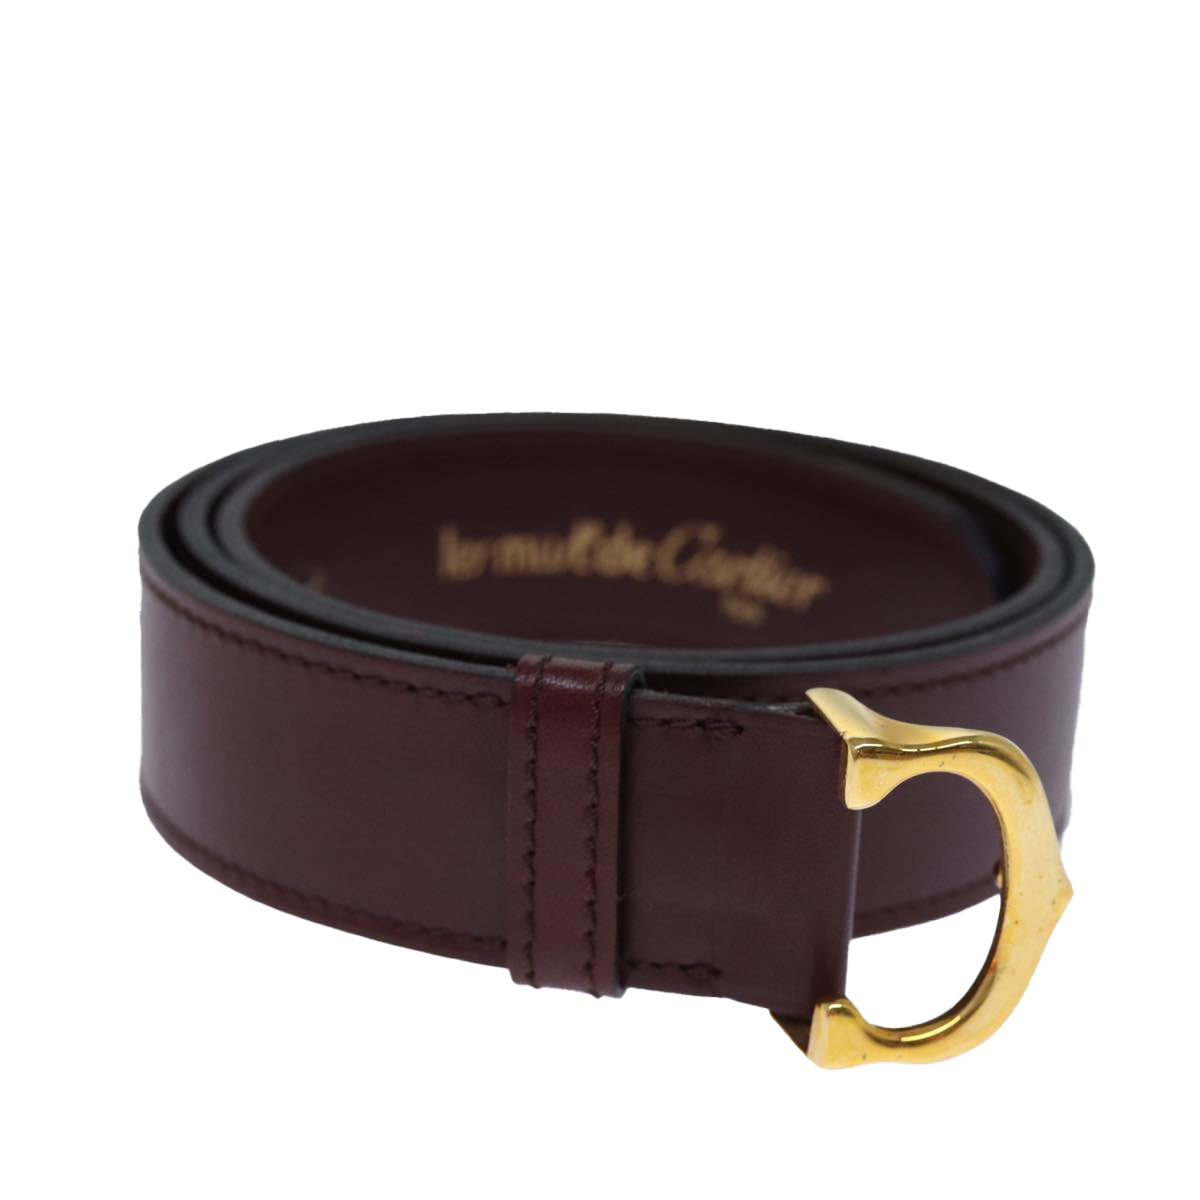 CARTIER Belt Leather 32.7"" Red Auth am6241